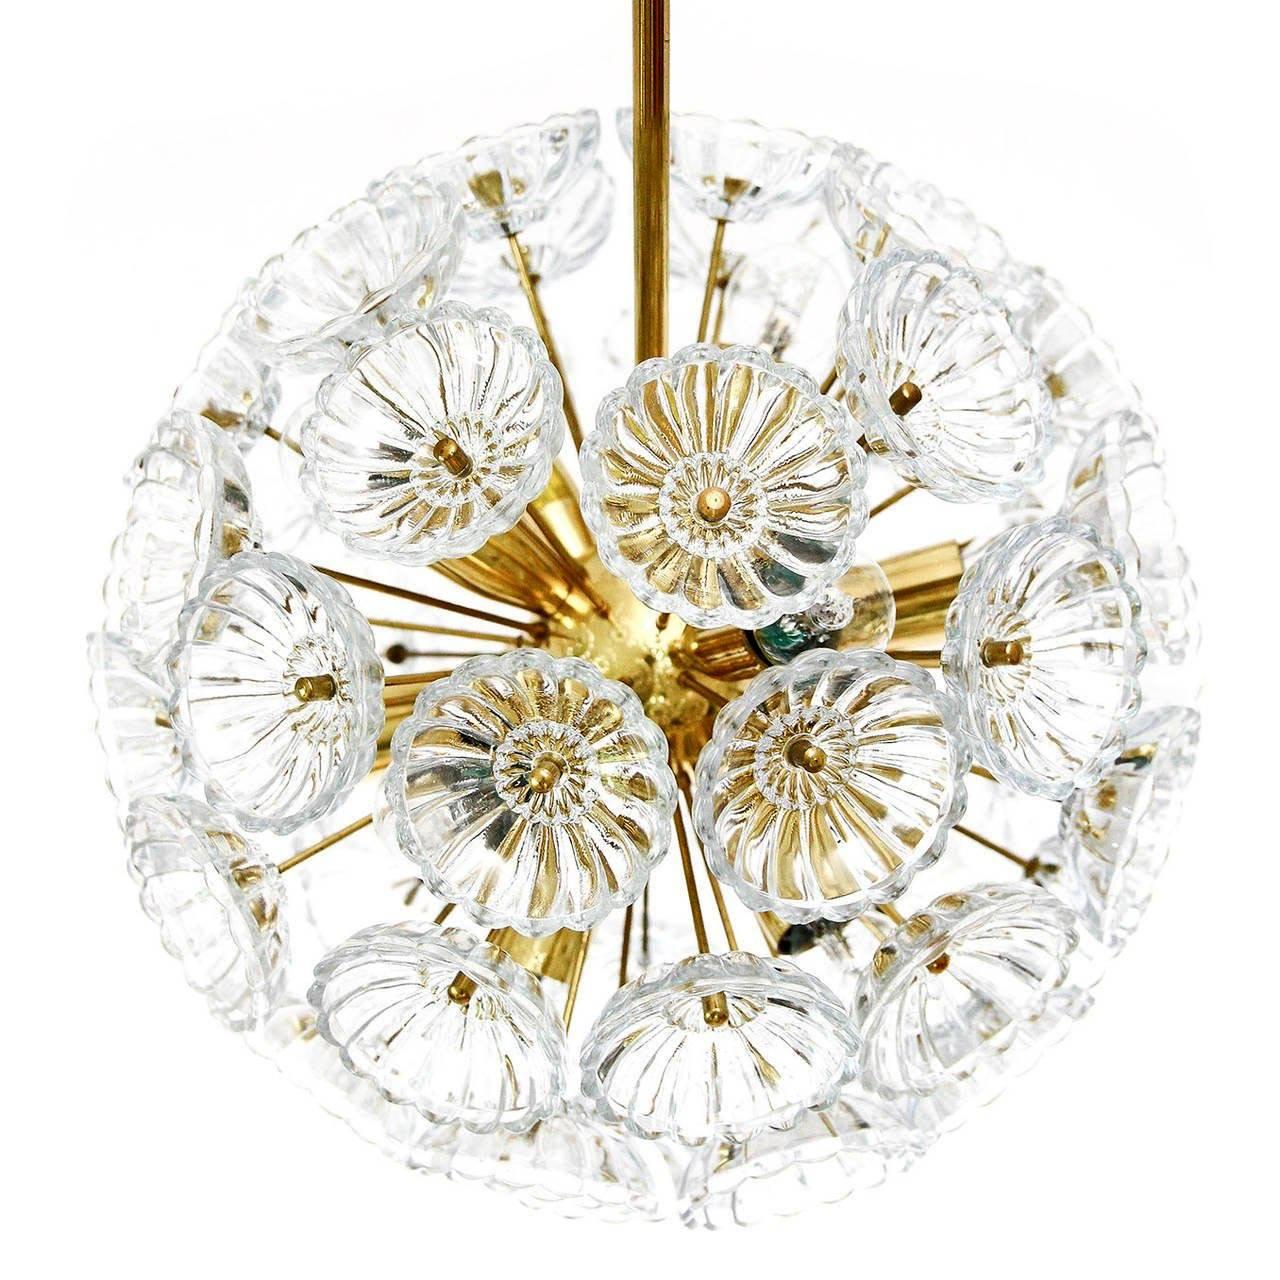 Mid-Century Modern Pair of Sputnik Chandeliers Pendant Lights, Glass and Brass, Germany, 1960s